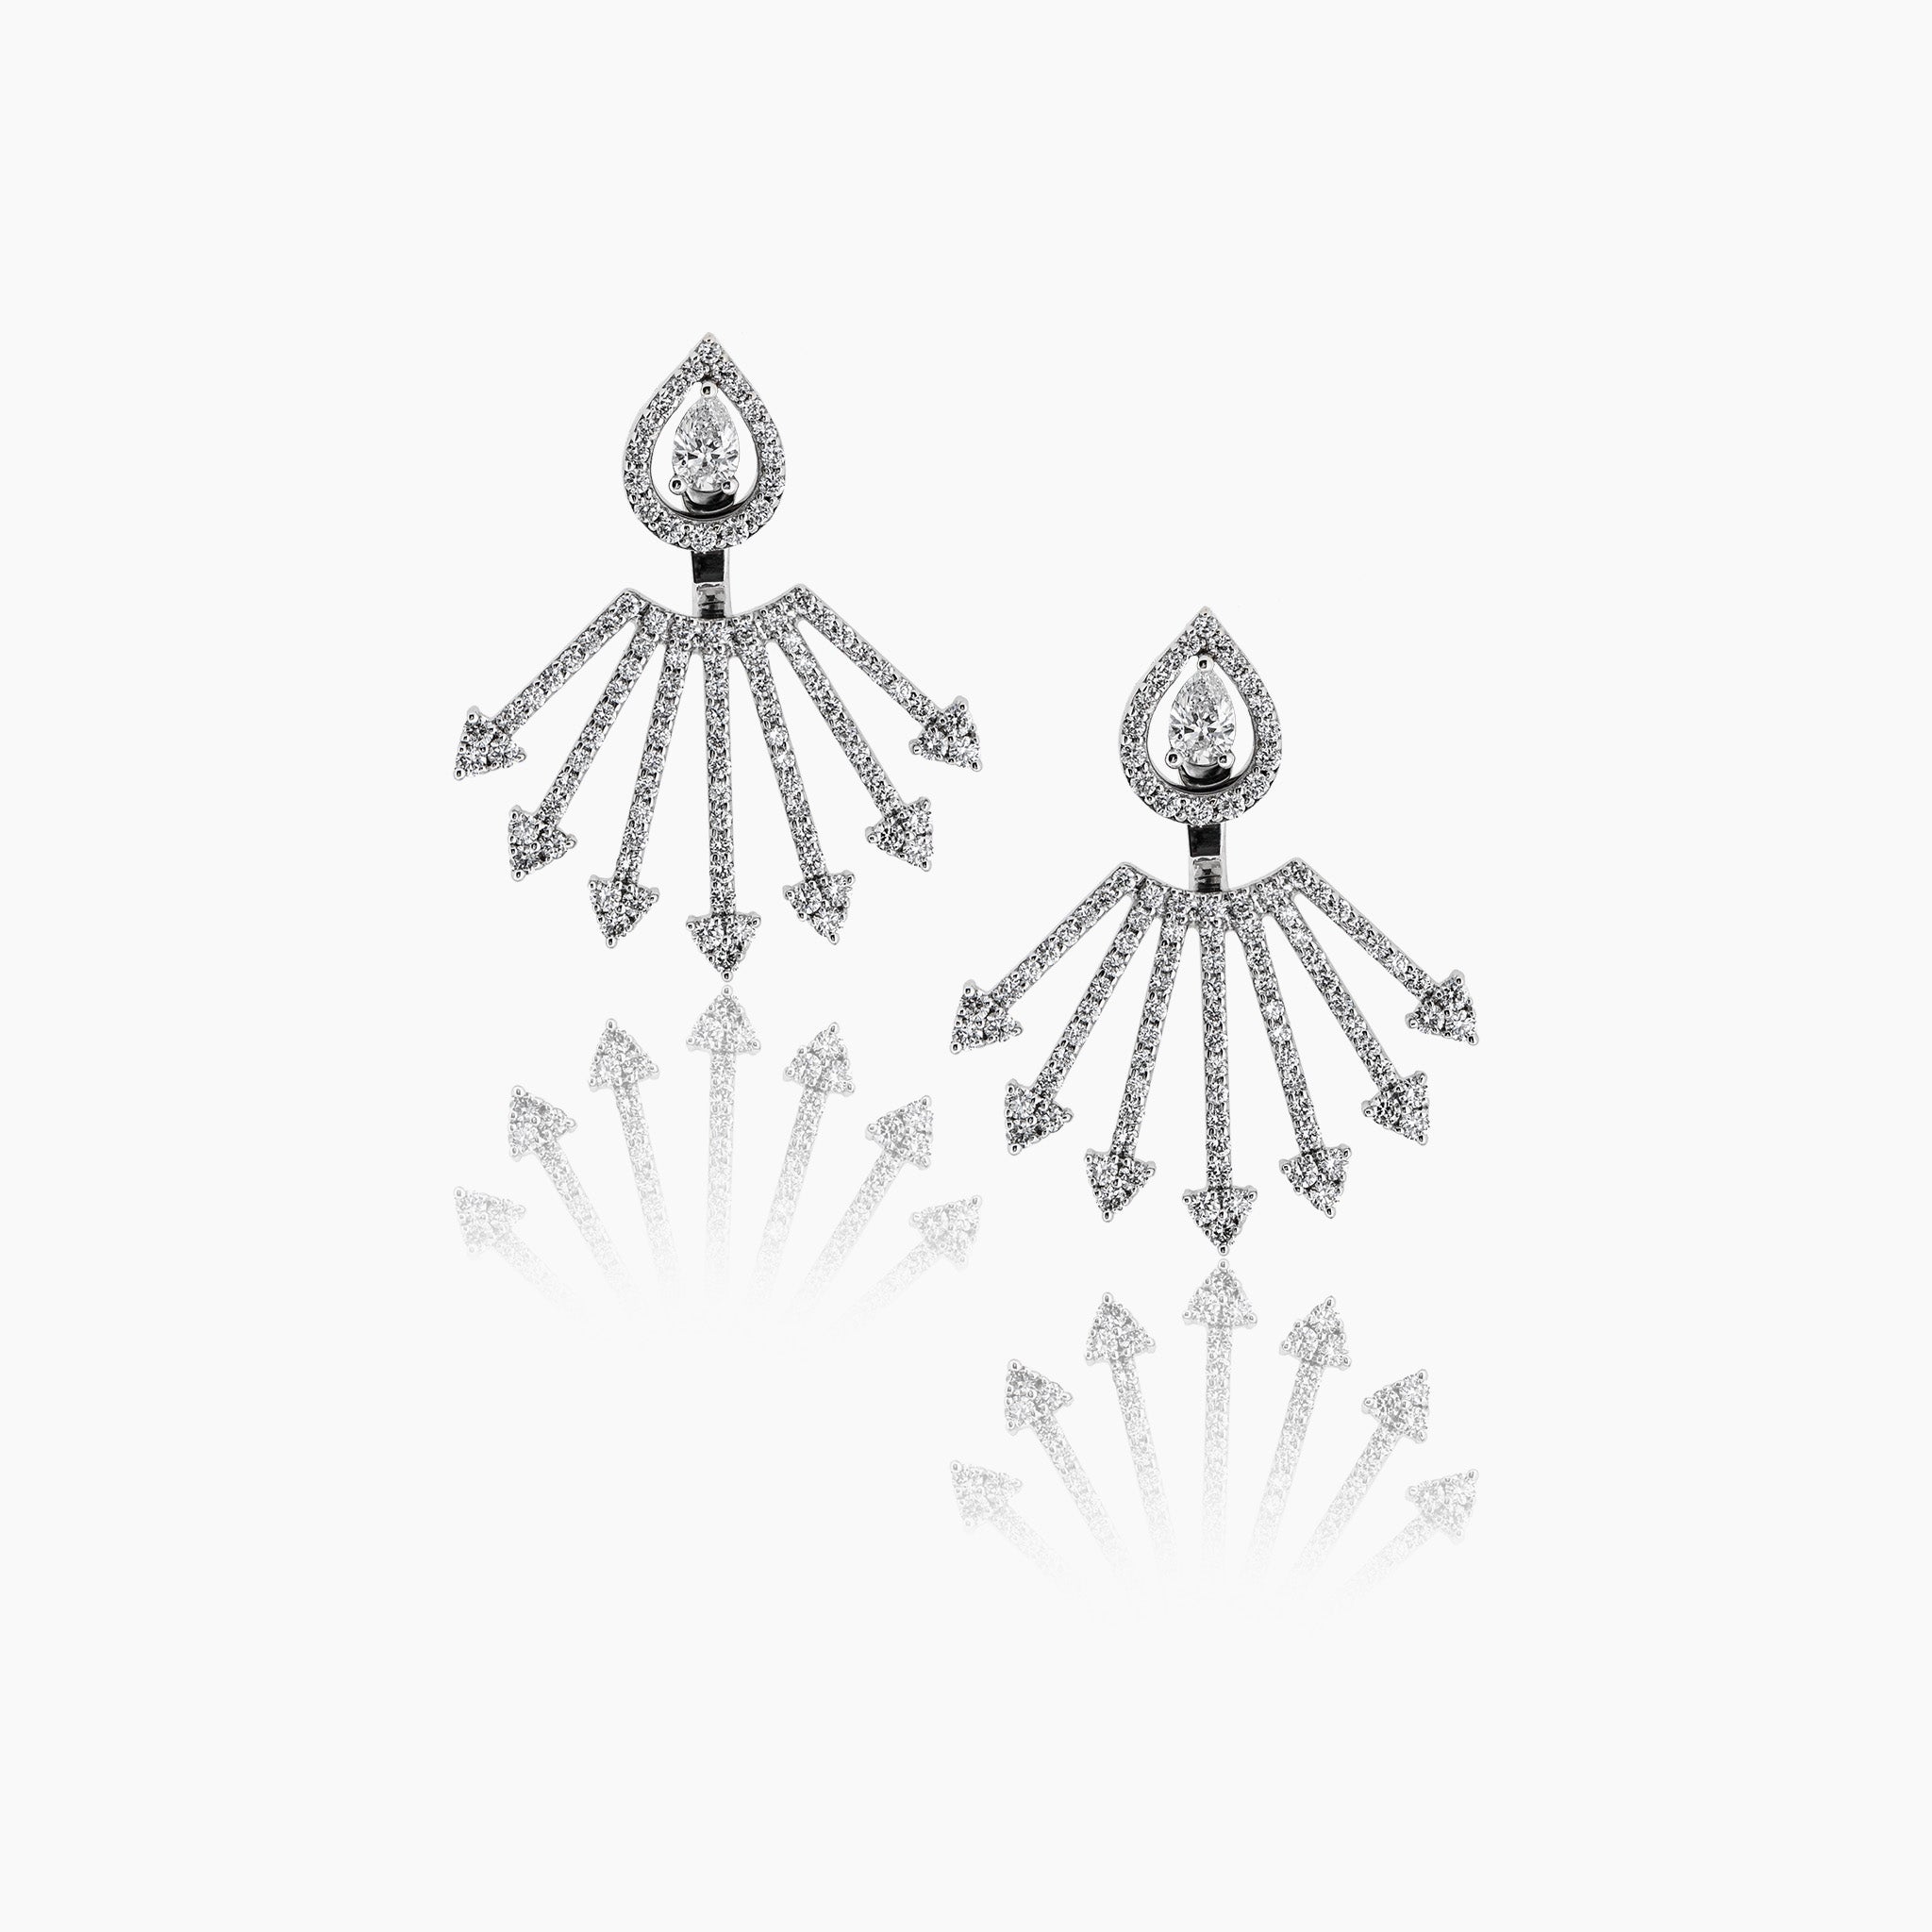 Diamond stud earrings with optional extensions, fine jewellery showcased on an off-white background.